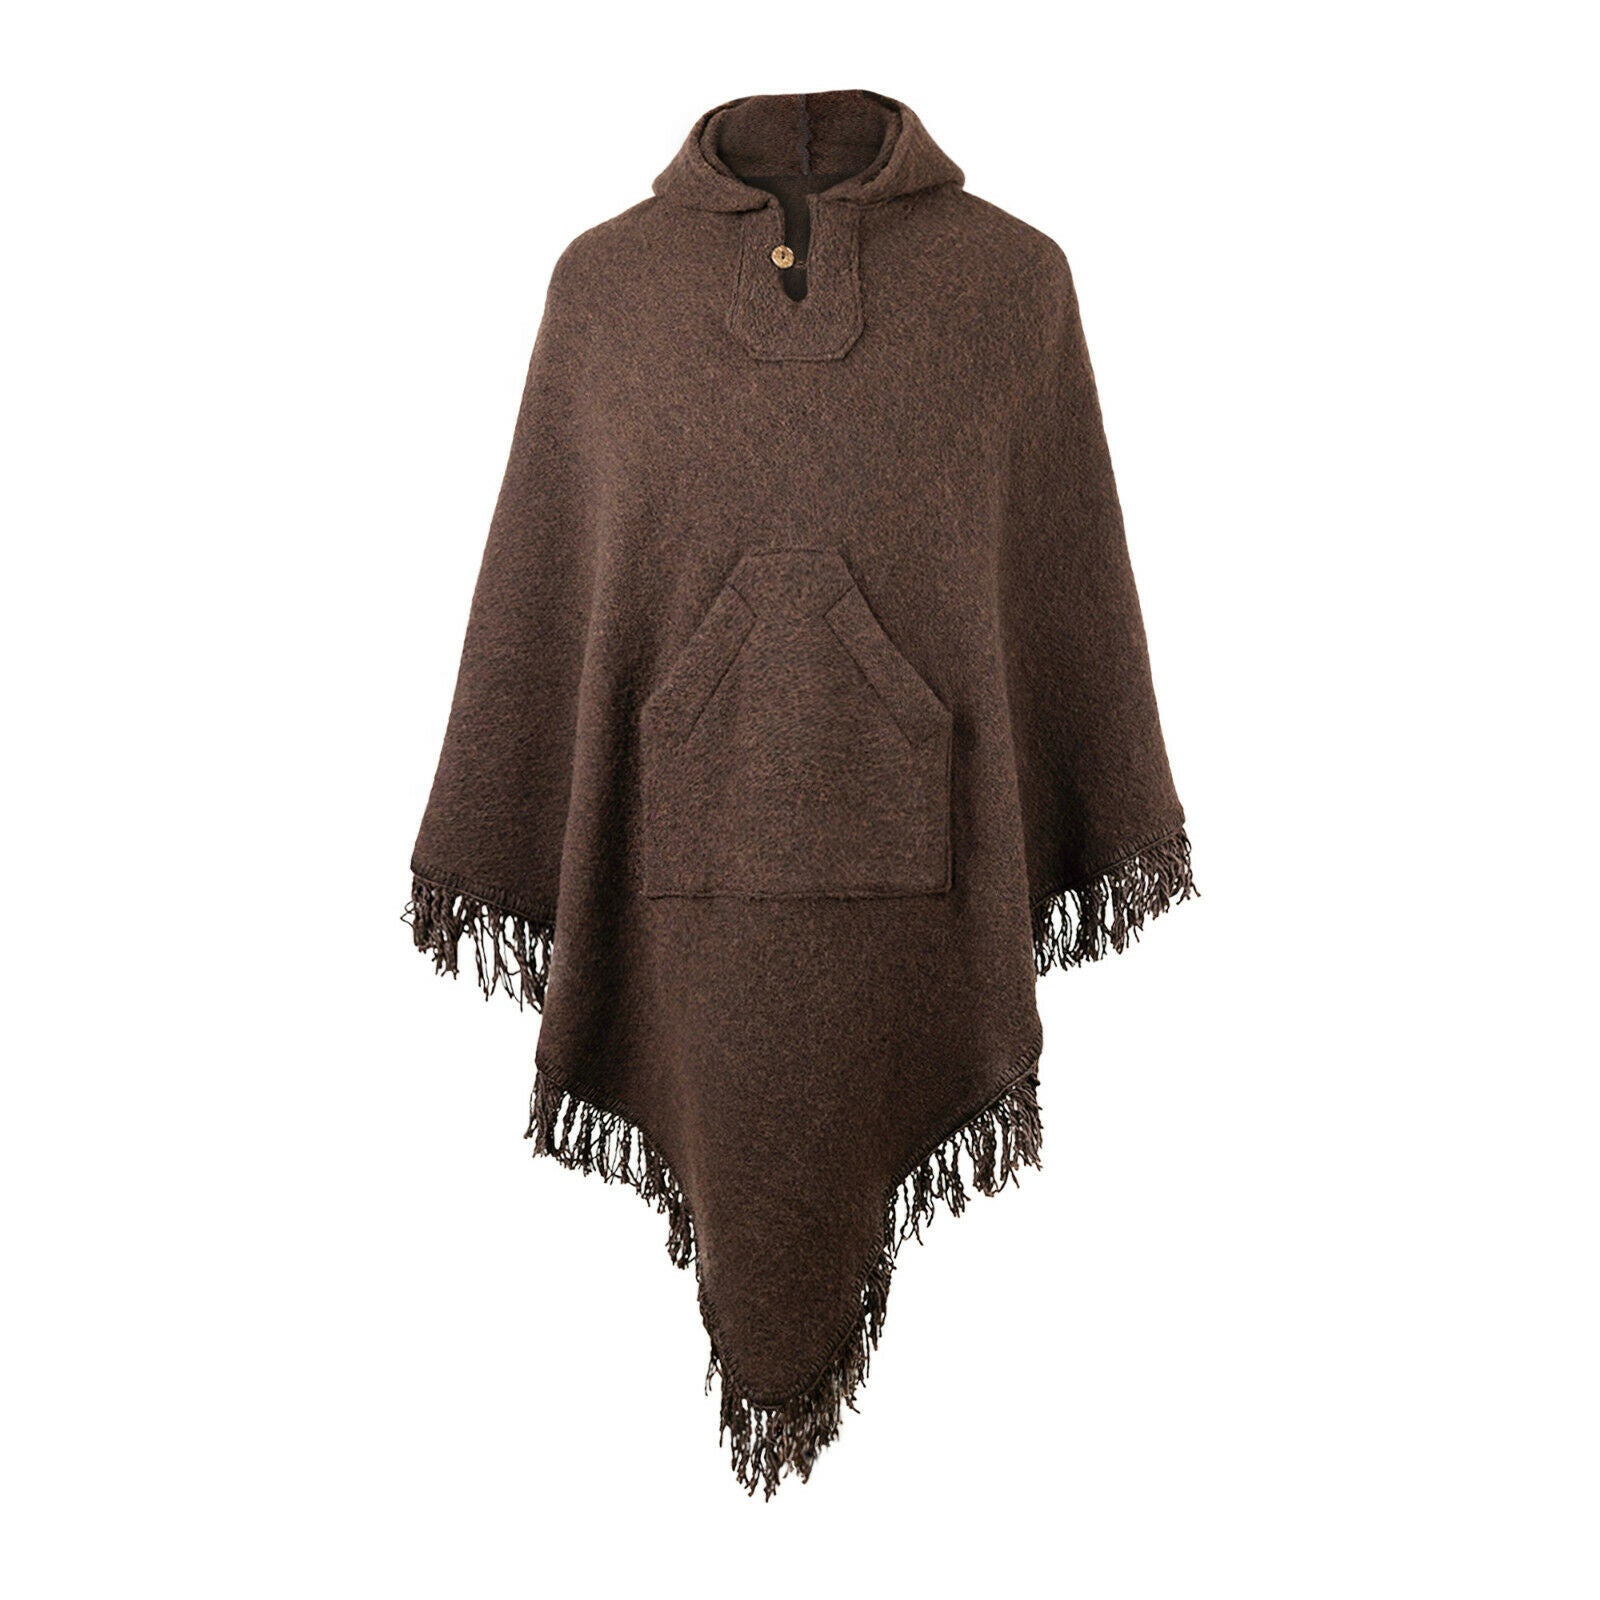 Extra Large Surfers Poncho with hood and pocket llama wool - BROWN